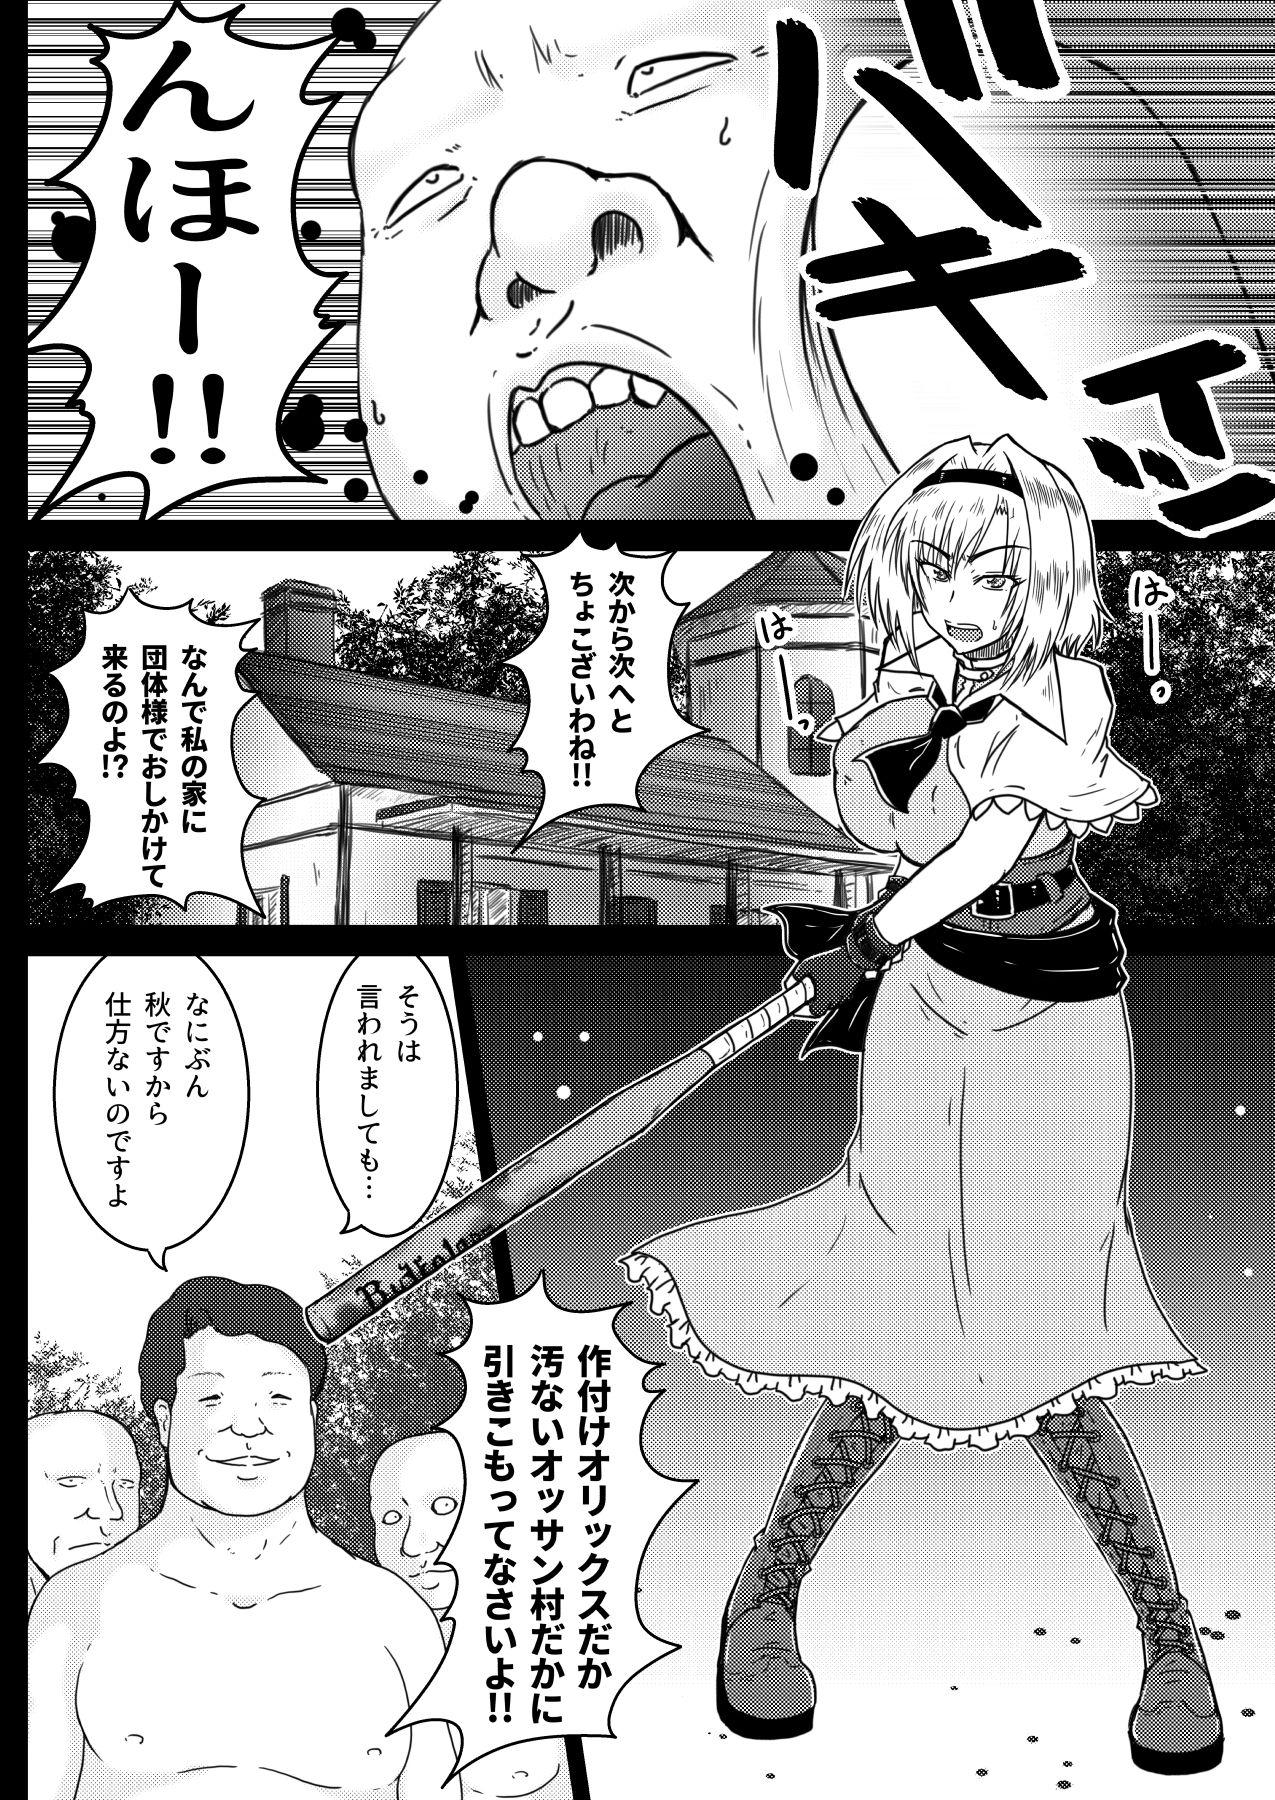 Dad 種付けおじさん百鬼夜行 - Touhou project Amateur - Page 5